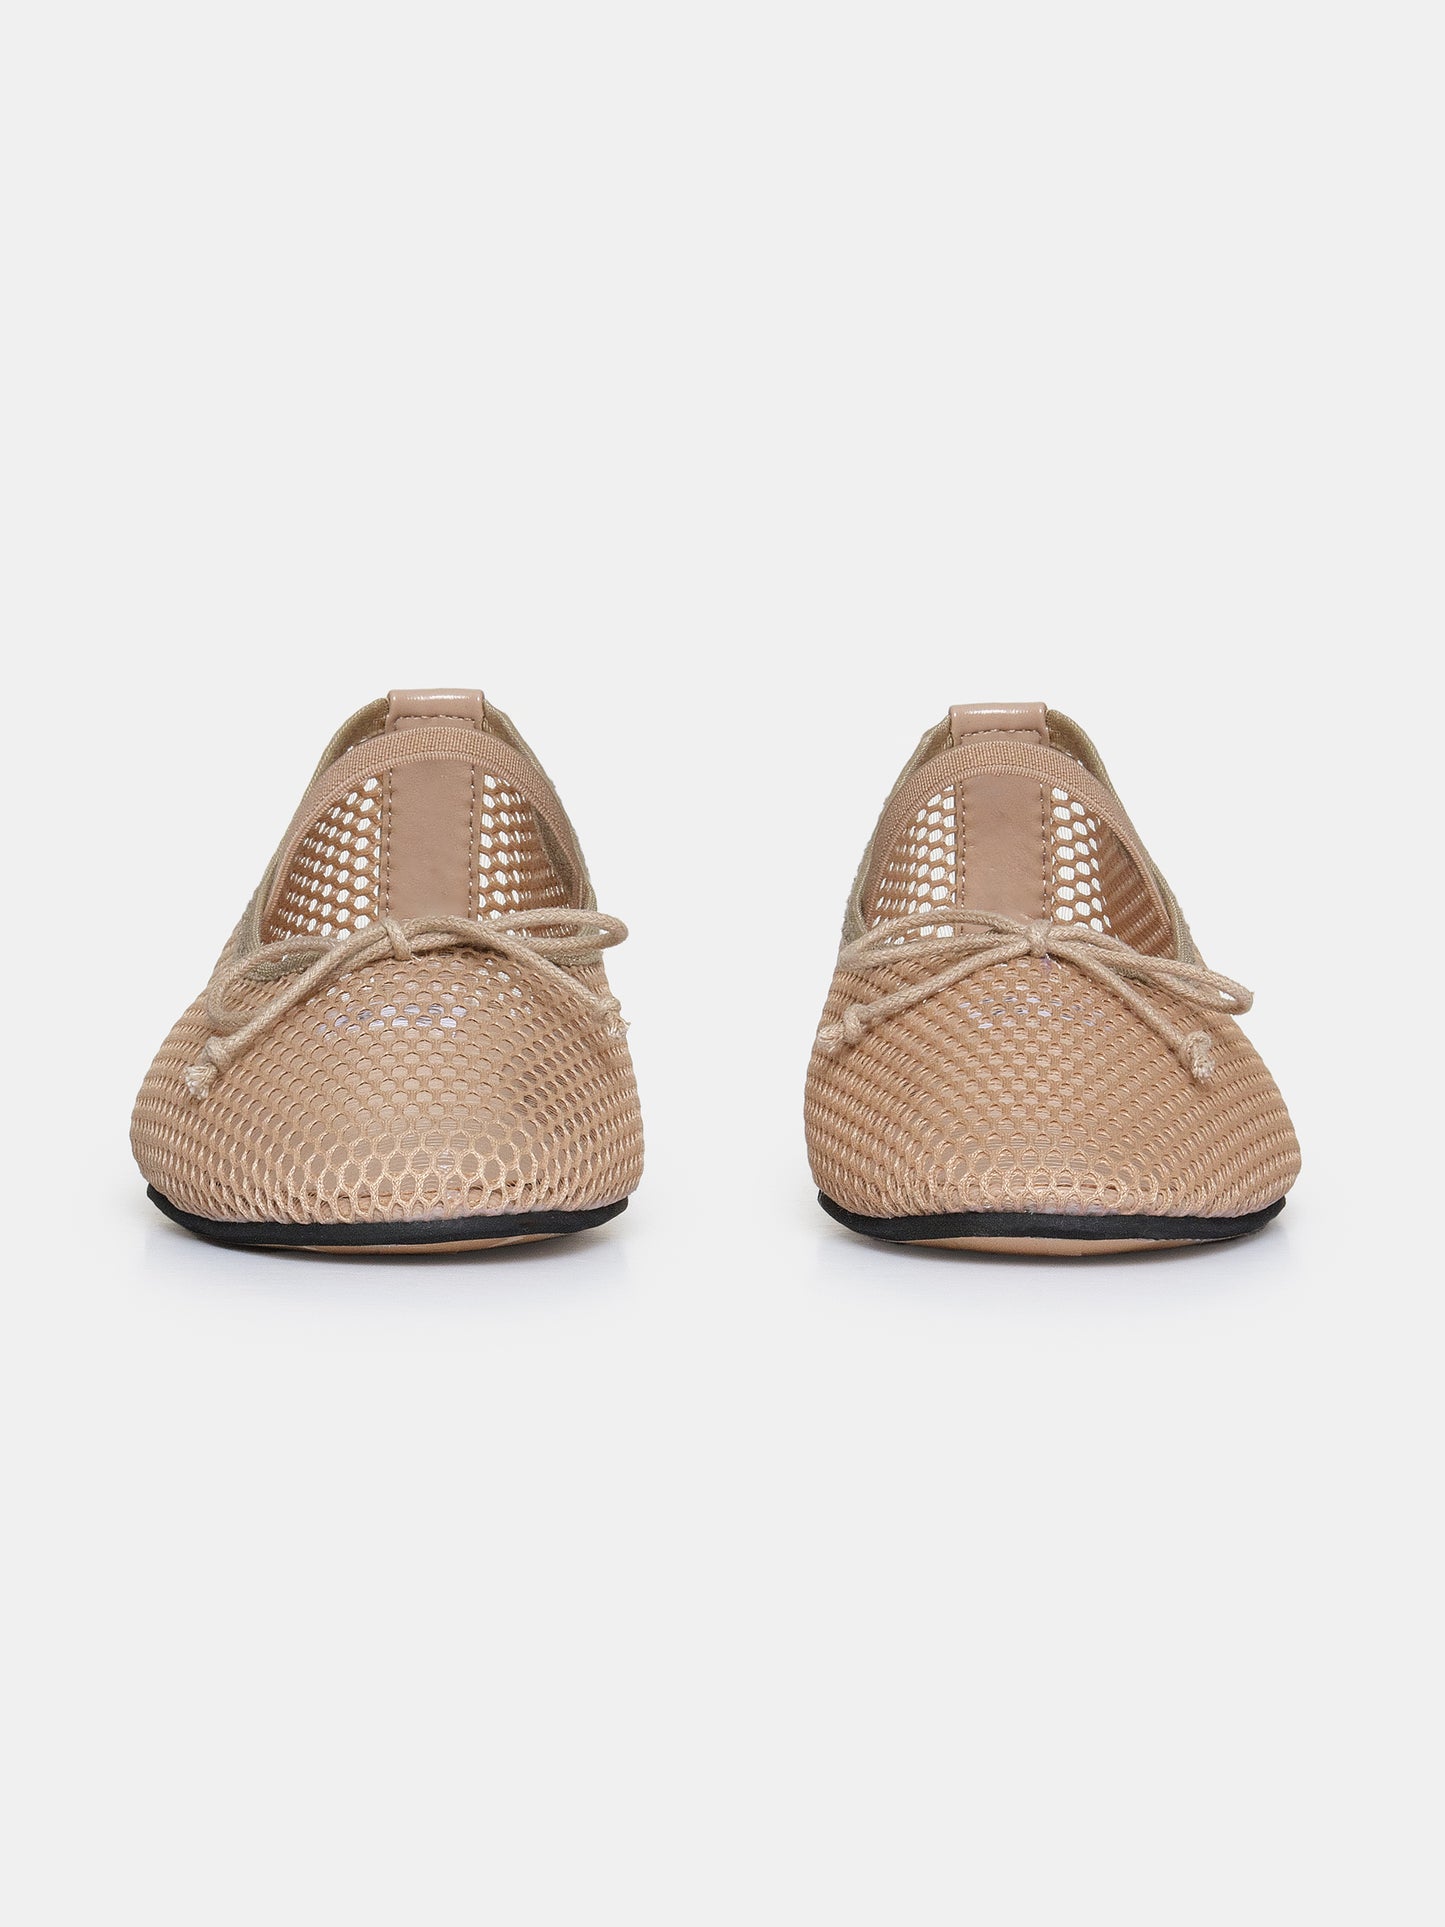 Mary Jane Mesh Ballet Flats, Taupe